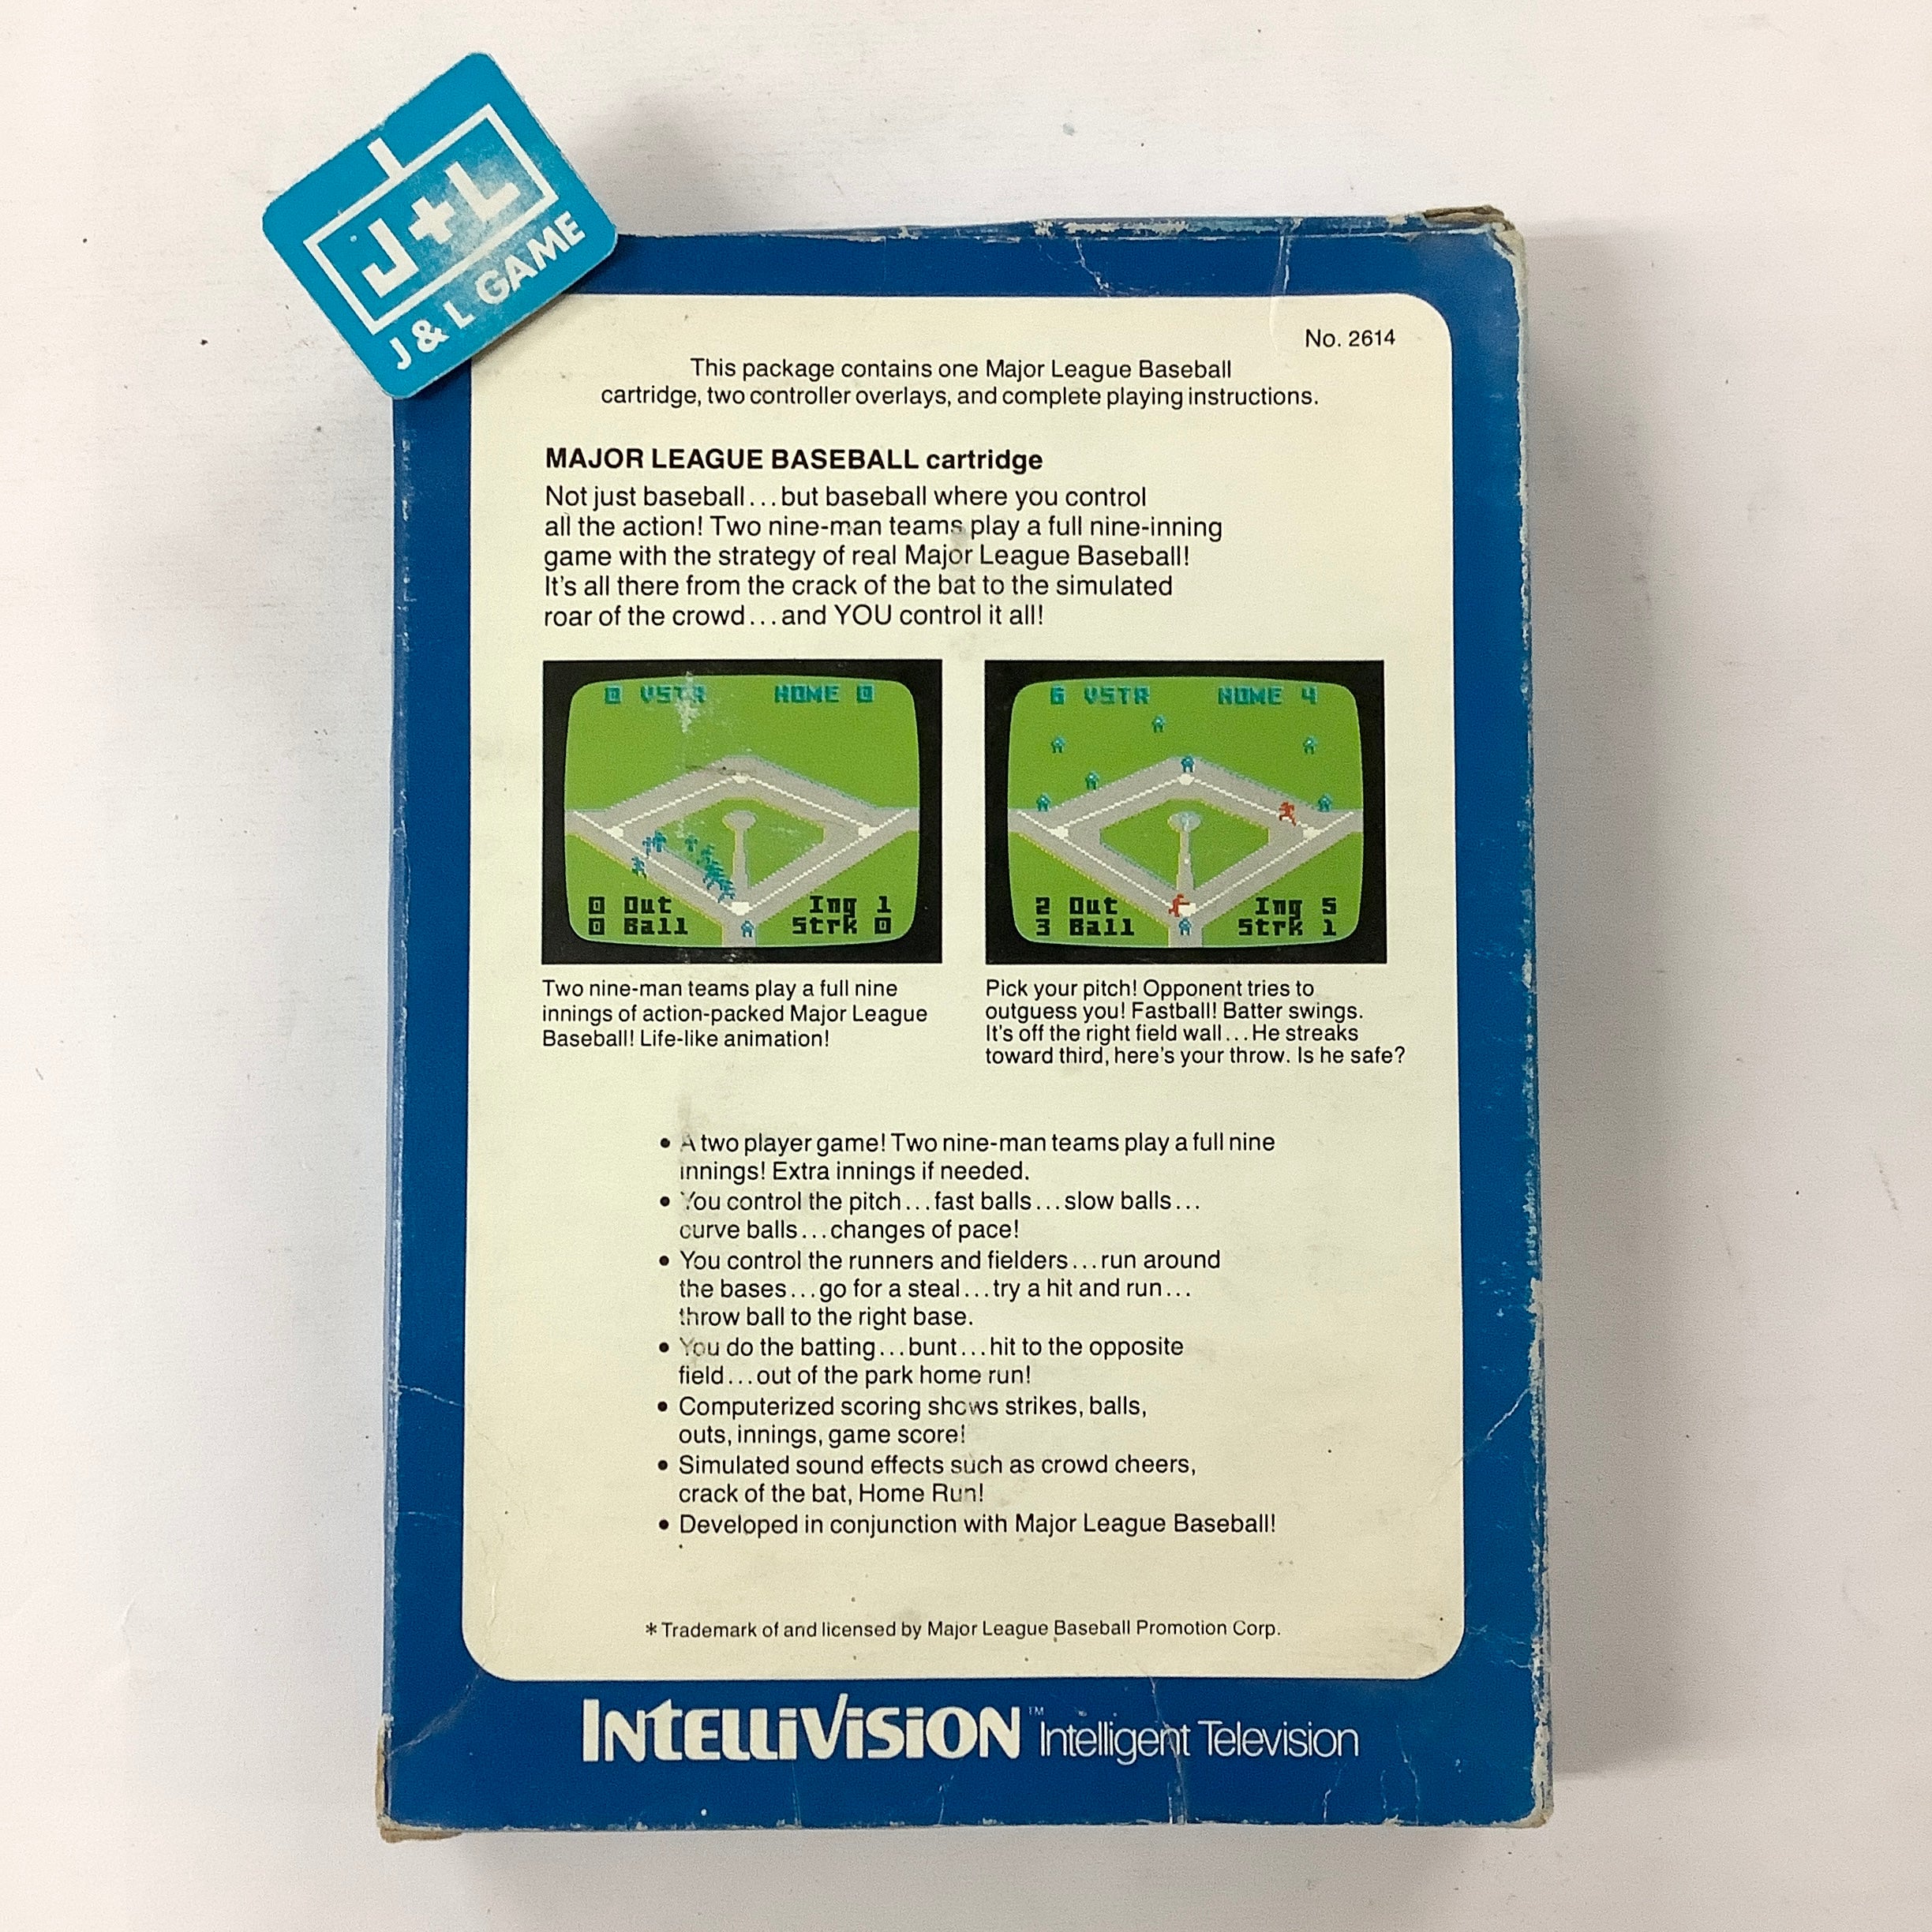 Major League Baseball - (INTV) Intellivision [Pre-Owned] Toy 3M   